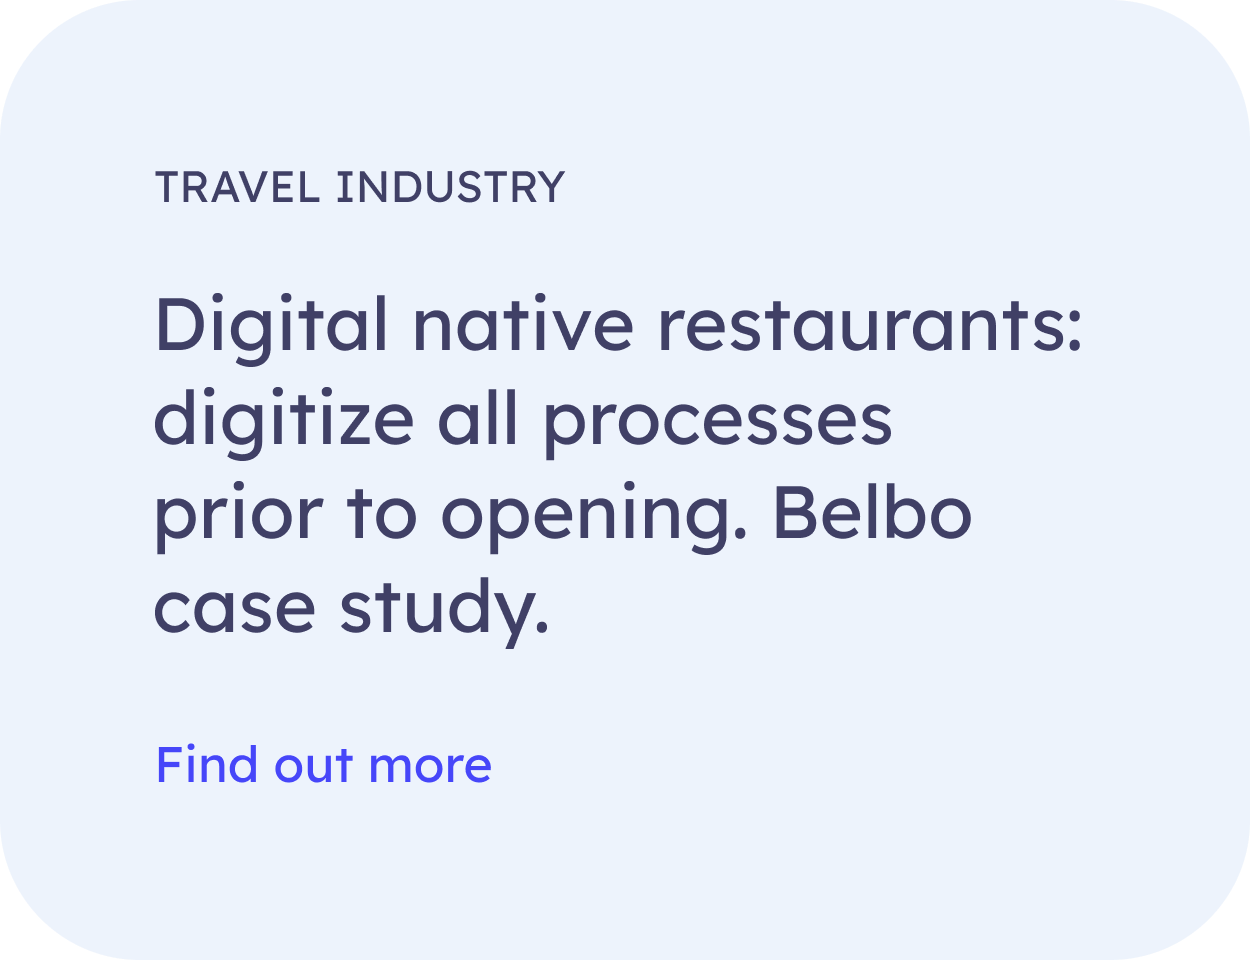 Digital native restaurants: digitize all processes prior to opening. Belbo case study.